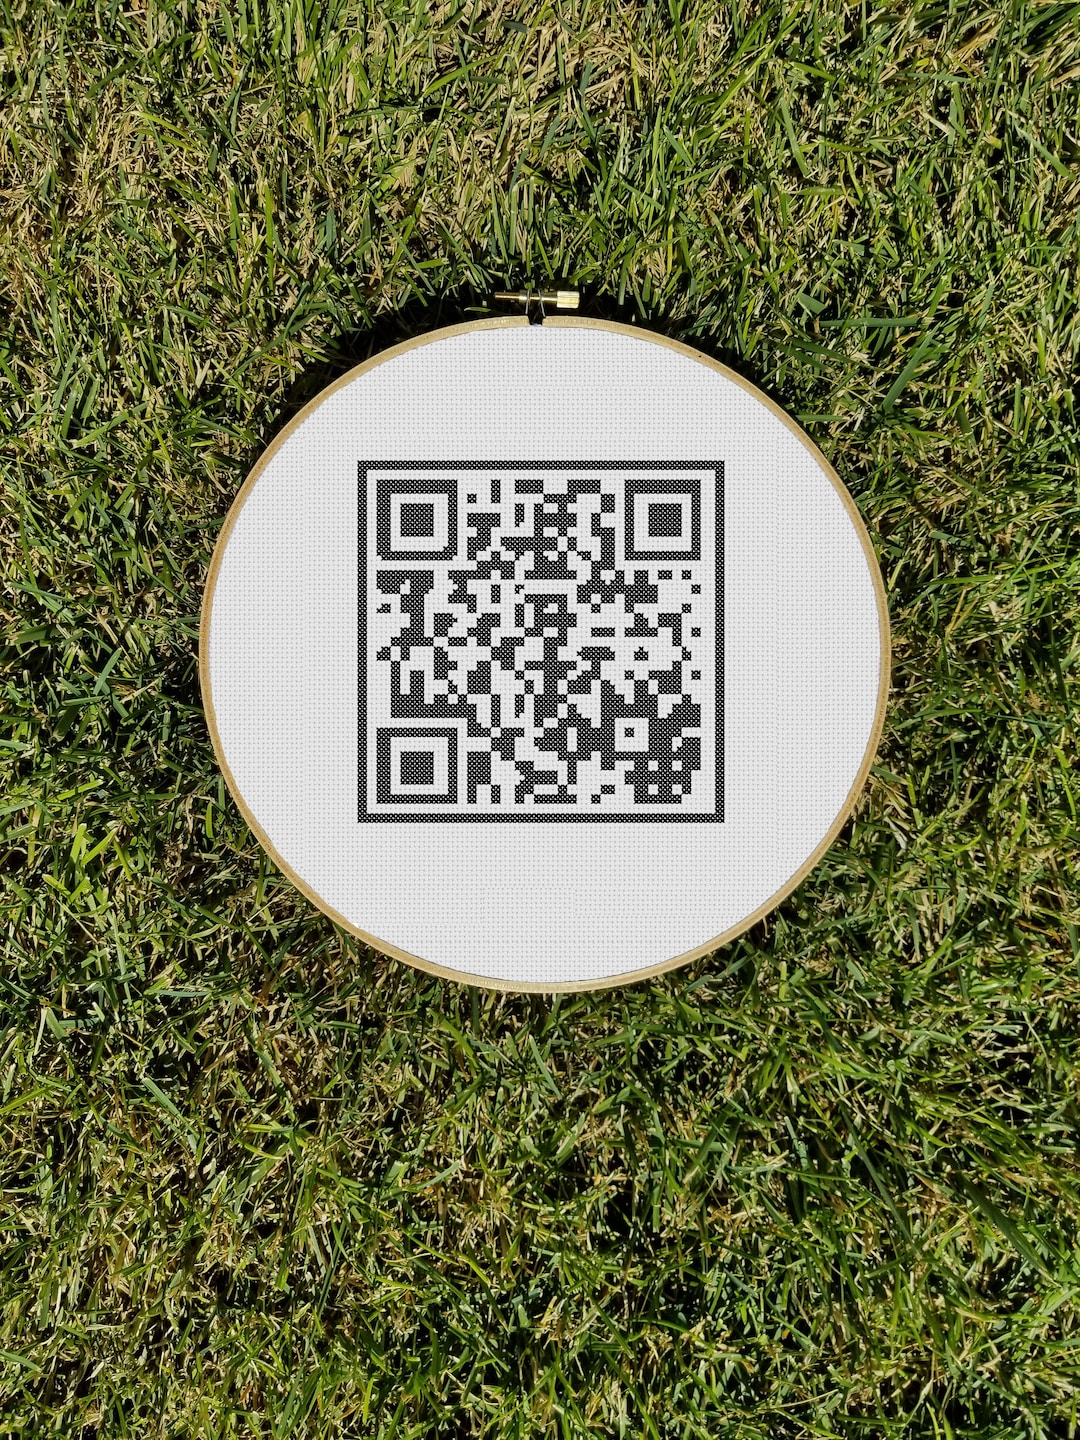 FO] simple but effective: Cross stiched rick roll QR code : r